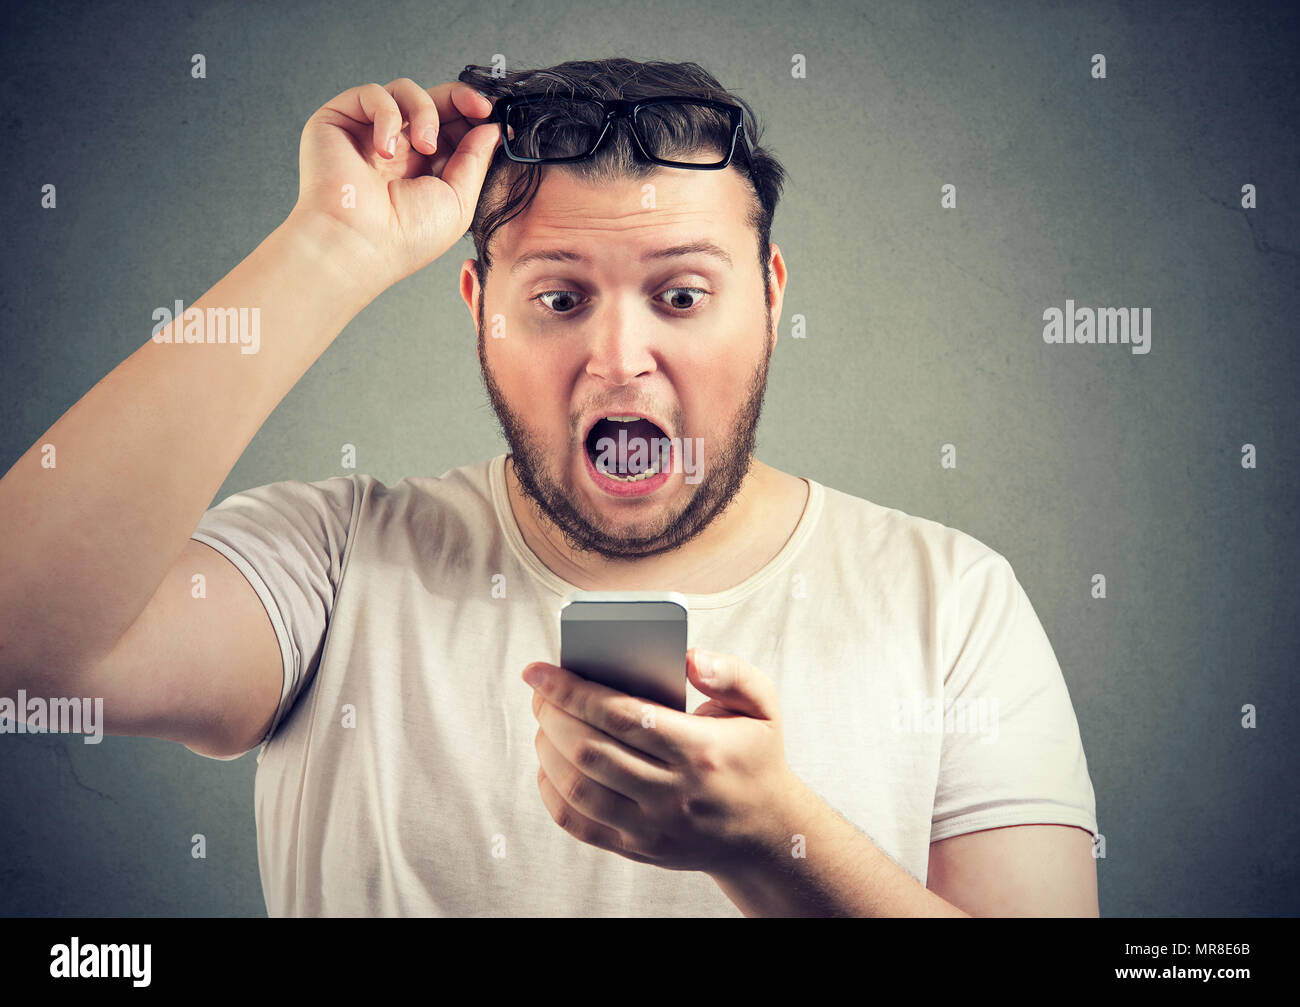 Super amazed young man with overweight reading shocking news on smartphone holding glasses up with mouth opened. Stock Photo